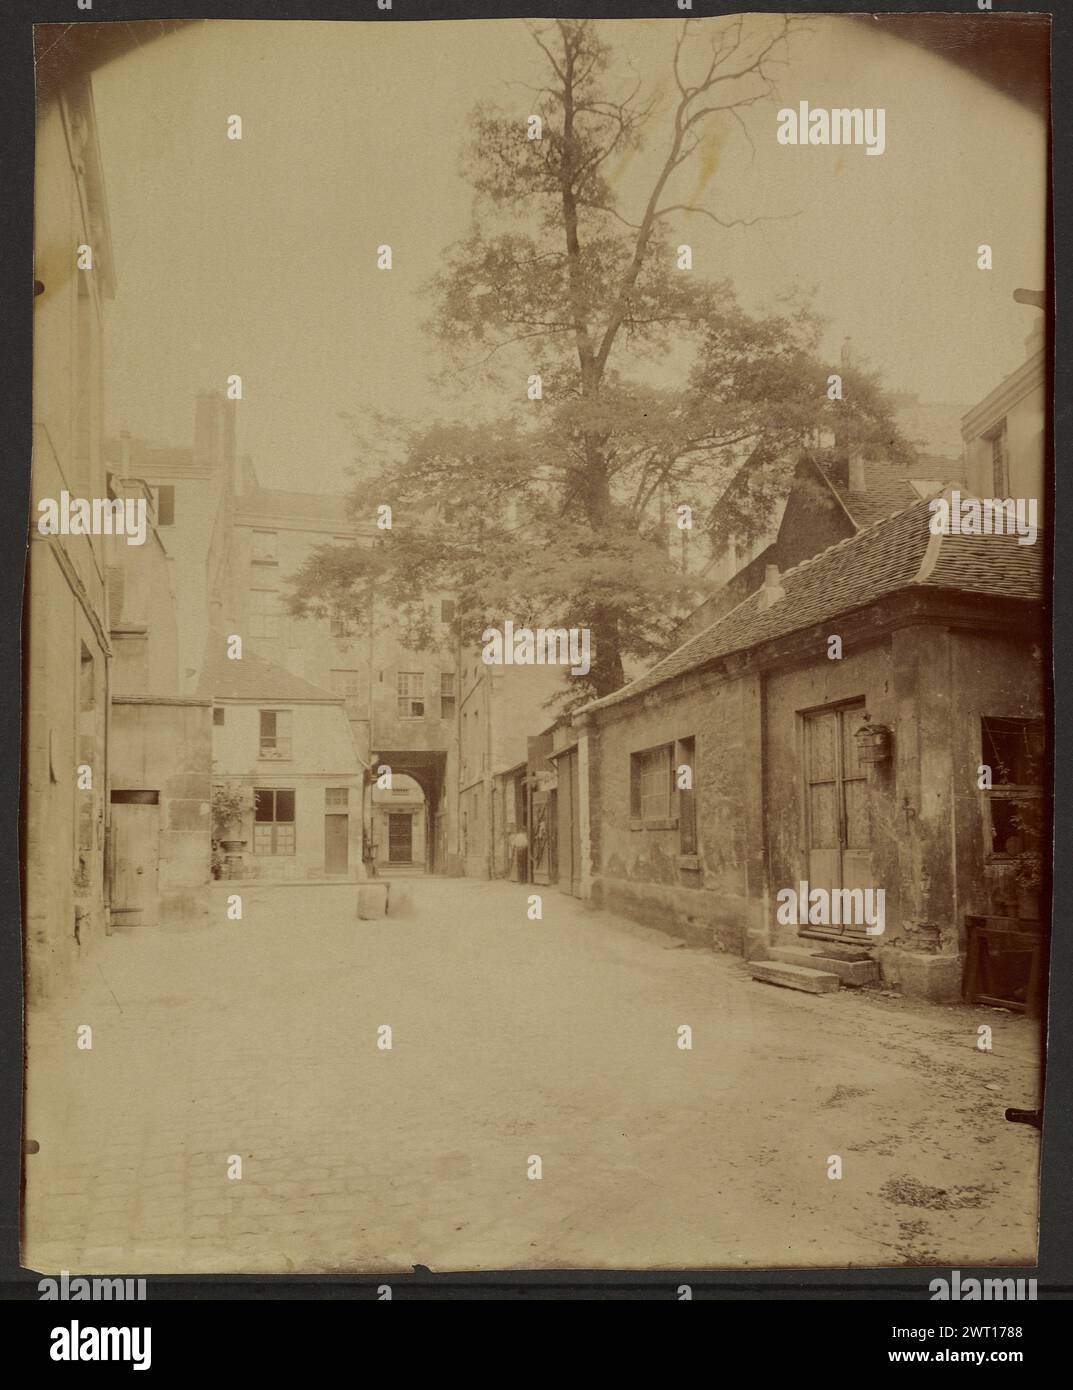 Ancien couvent des Carmélites, Rue Saint-Jacques, Va Disparaître. Eugène Atget, photographer (French, 1857 - 1927) 1899 Courtyard with random buildings and a large tree Inscription: Title and negative number '3672' inscribed verso print in pencil. Stock Photo